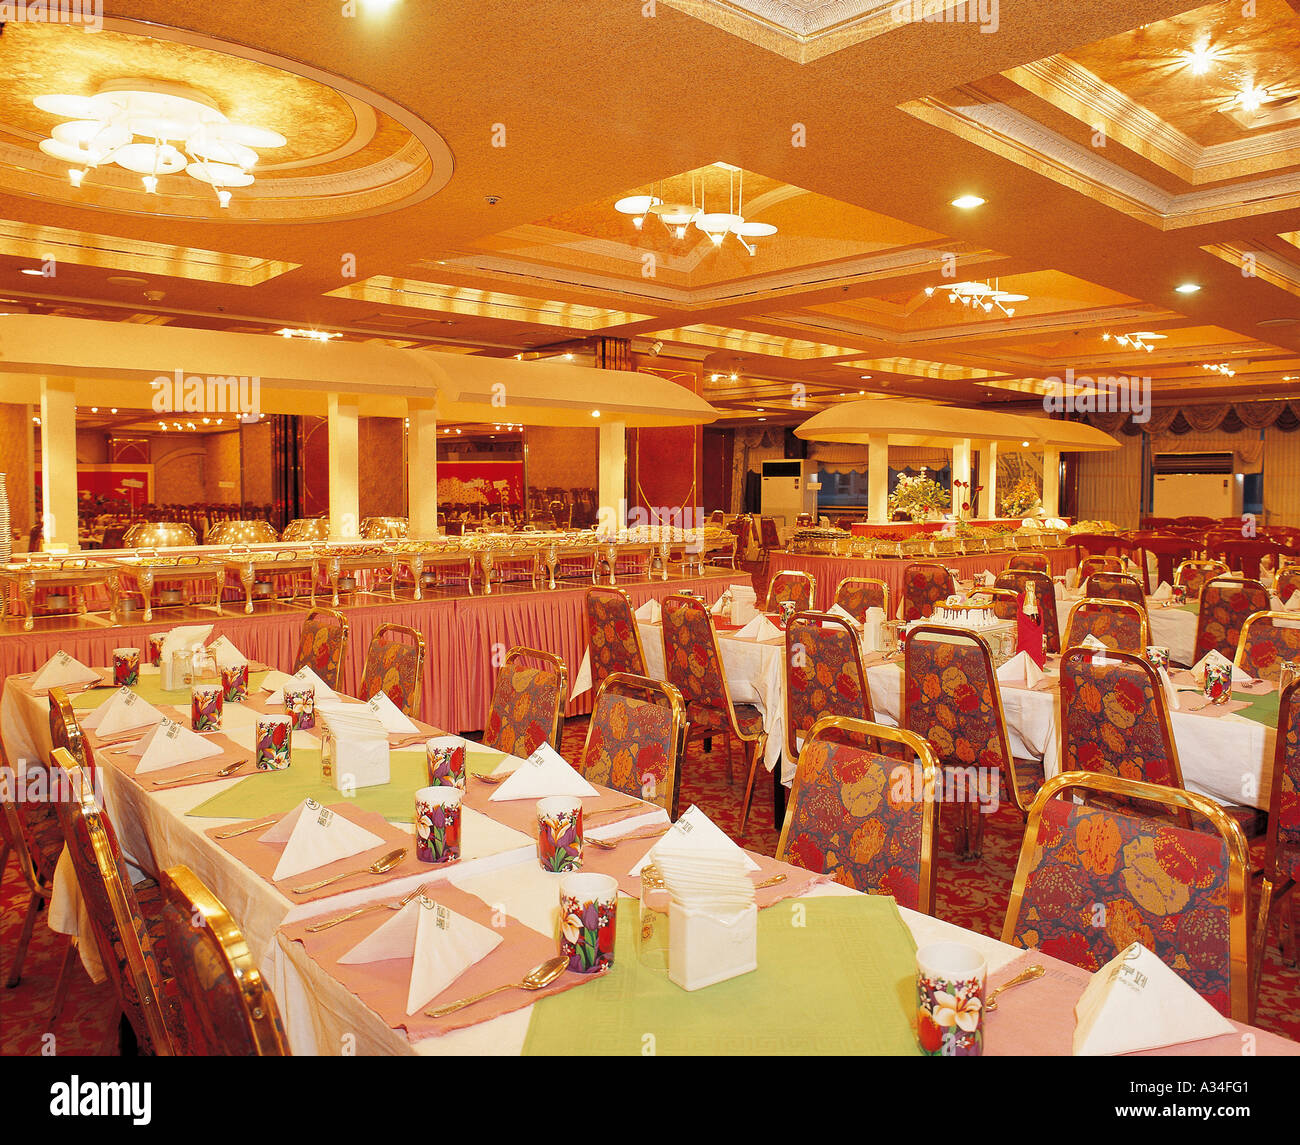 Banquet Hall Stock Photos Banquet Hall Stock Images Alamy